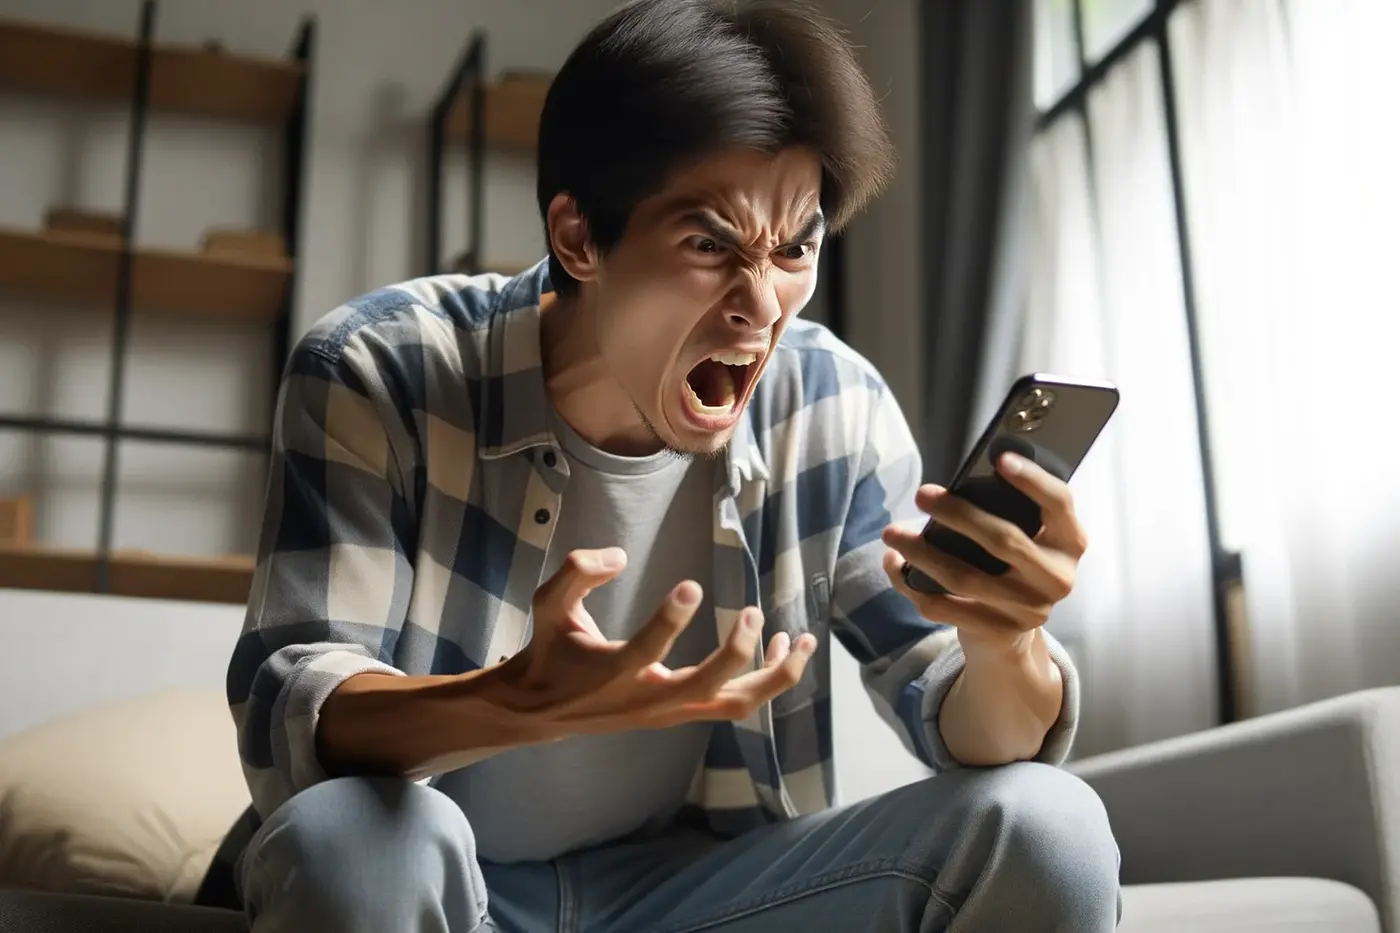 Photo of a distressed Asian man in a well-lit room, yelling at his iPhone which he holds firmly in his hand.